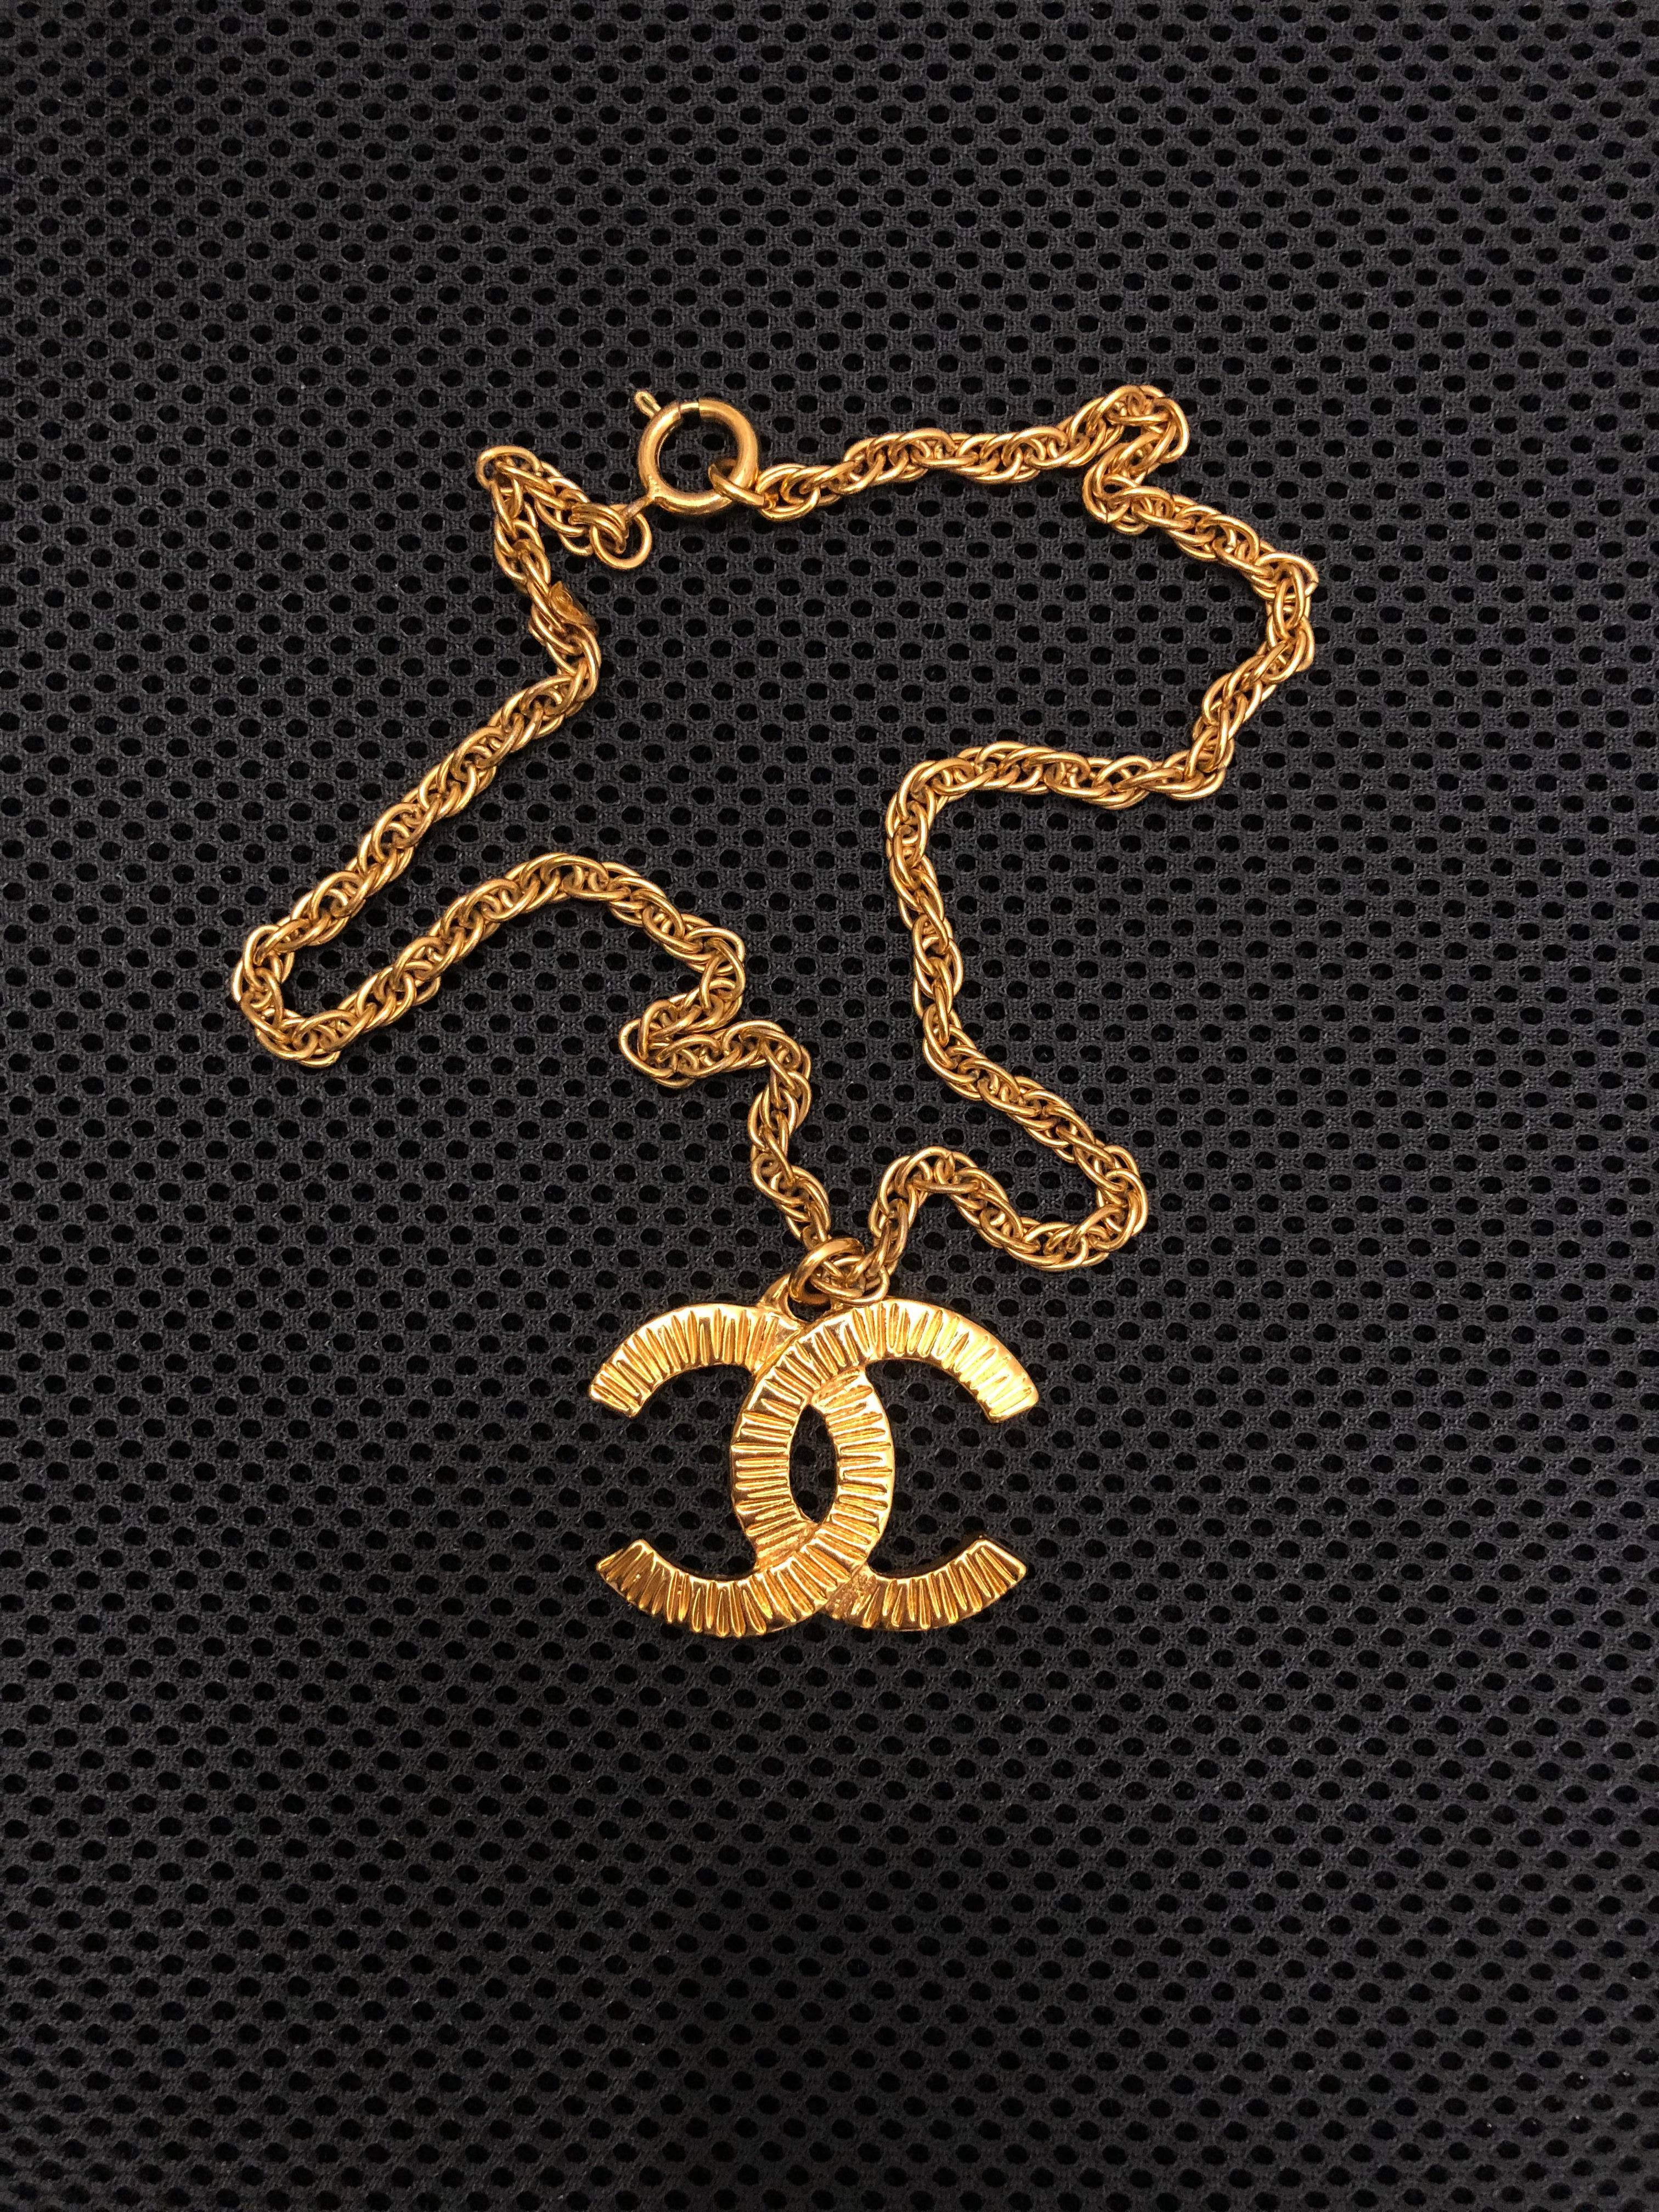 1993 Vintage CHANEL Gold Toned CC Charm Short Chain Necklace For Sale 3